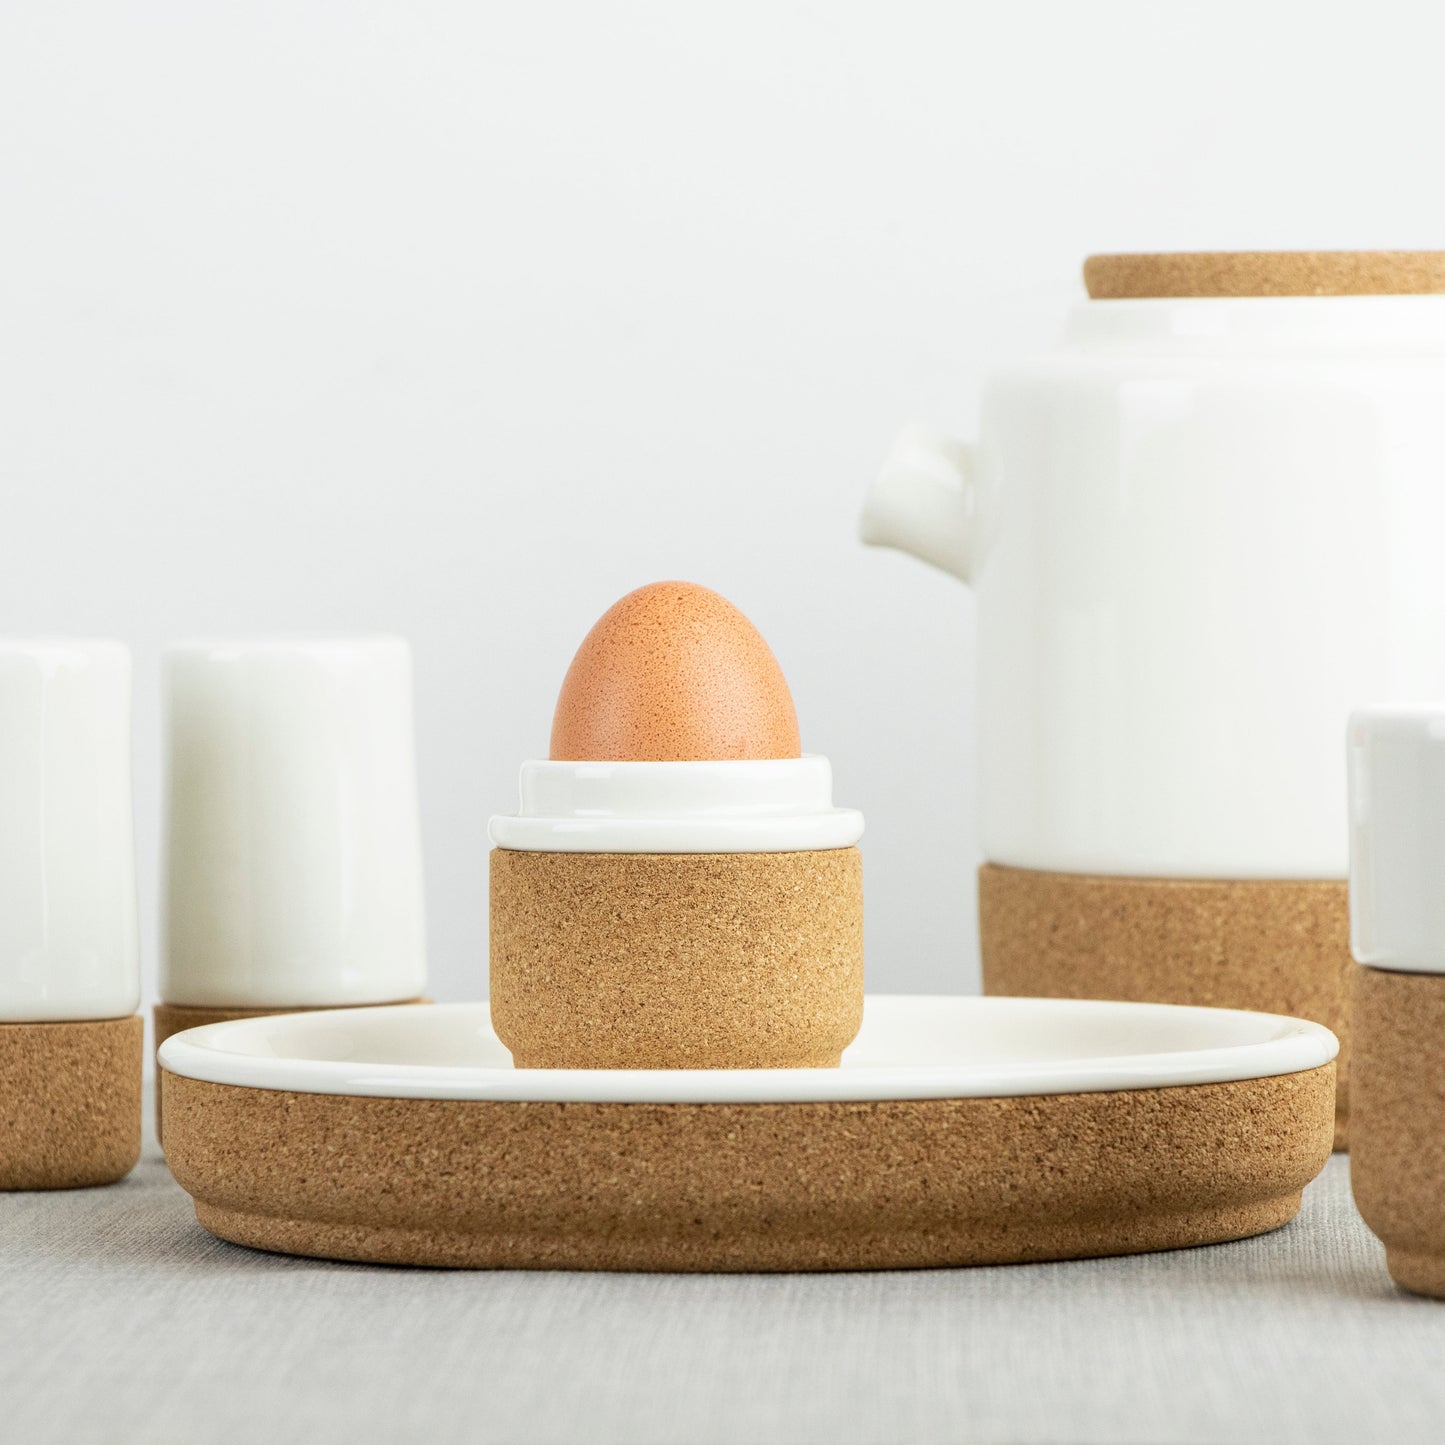 LIGA Cream Earthware collection - Egg cup, salt & pepper shakers, teapot and mug in cream ceramic and cork